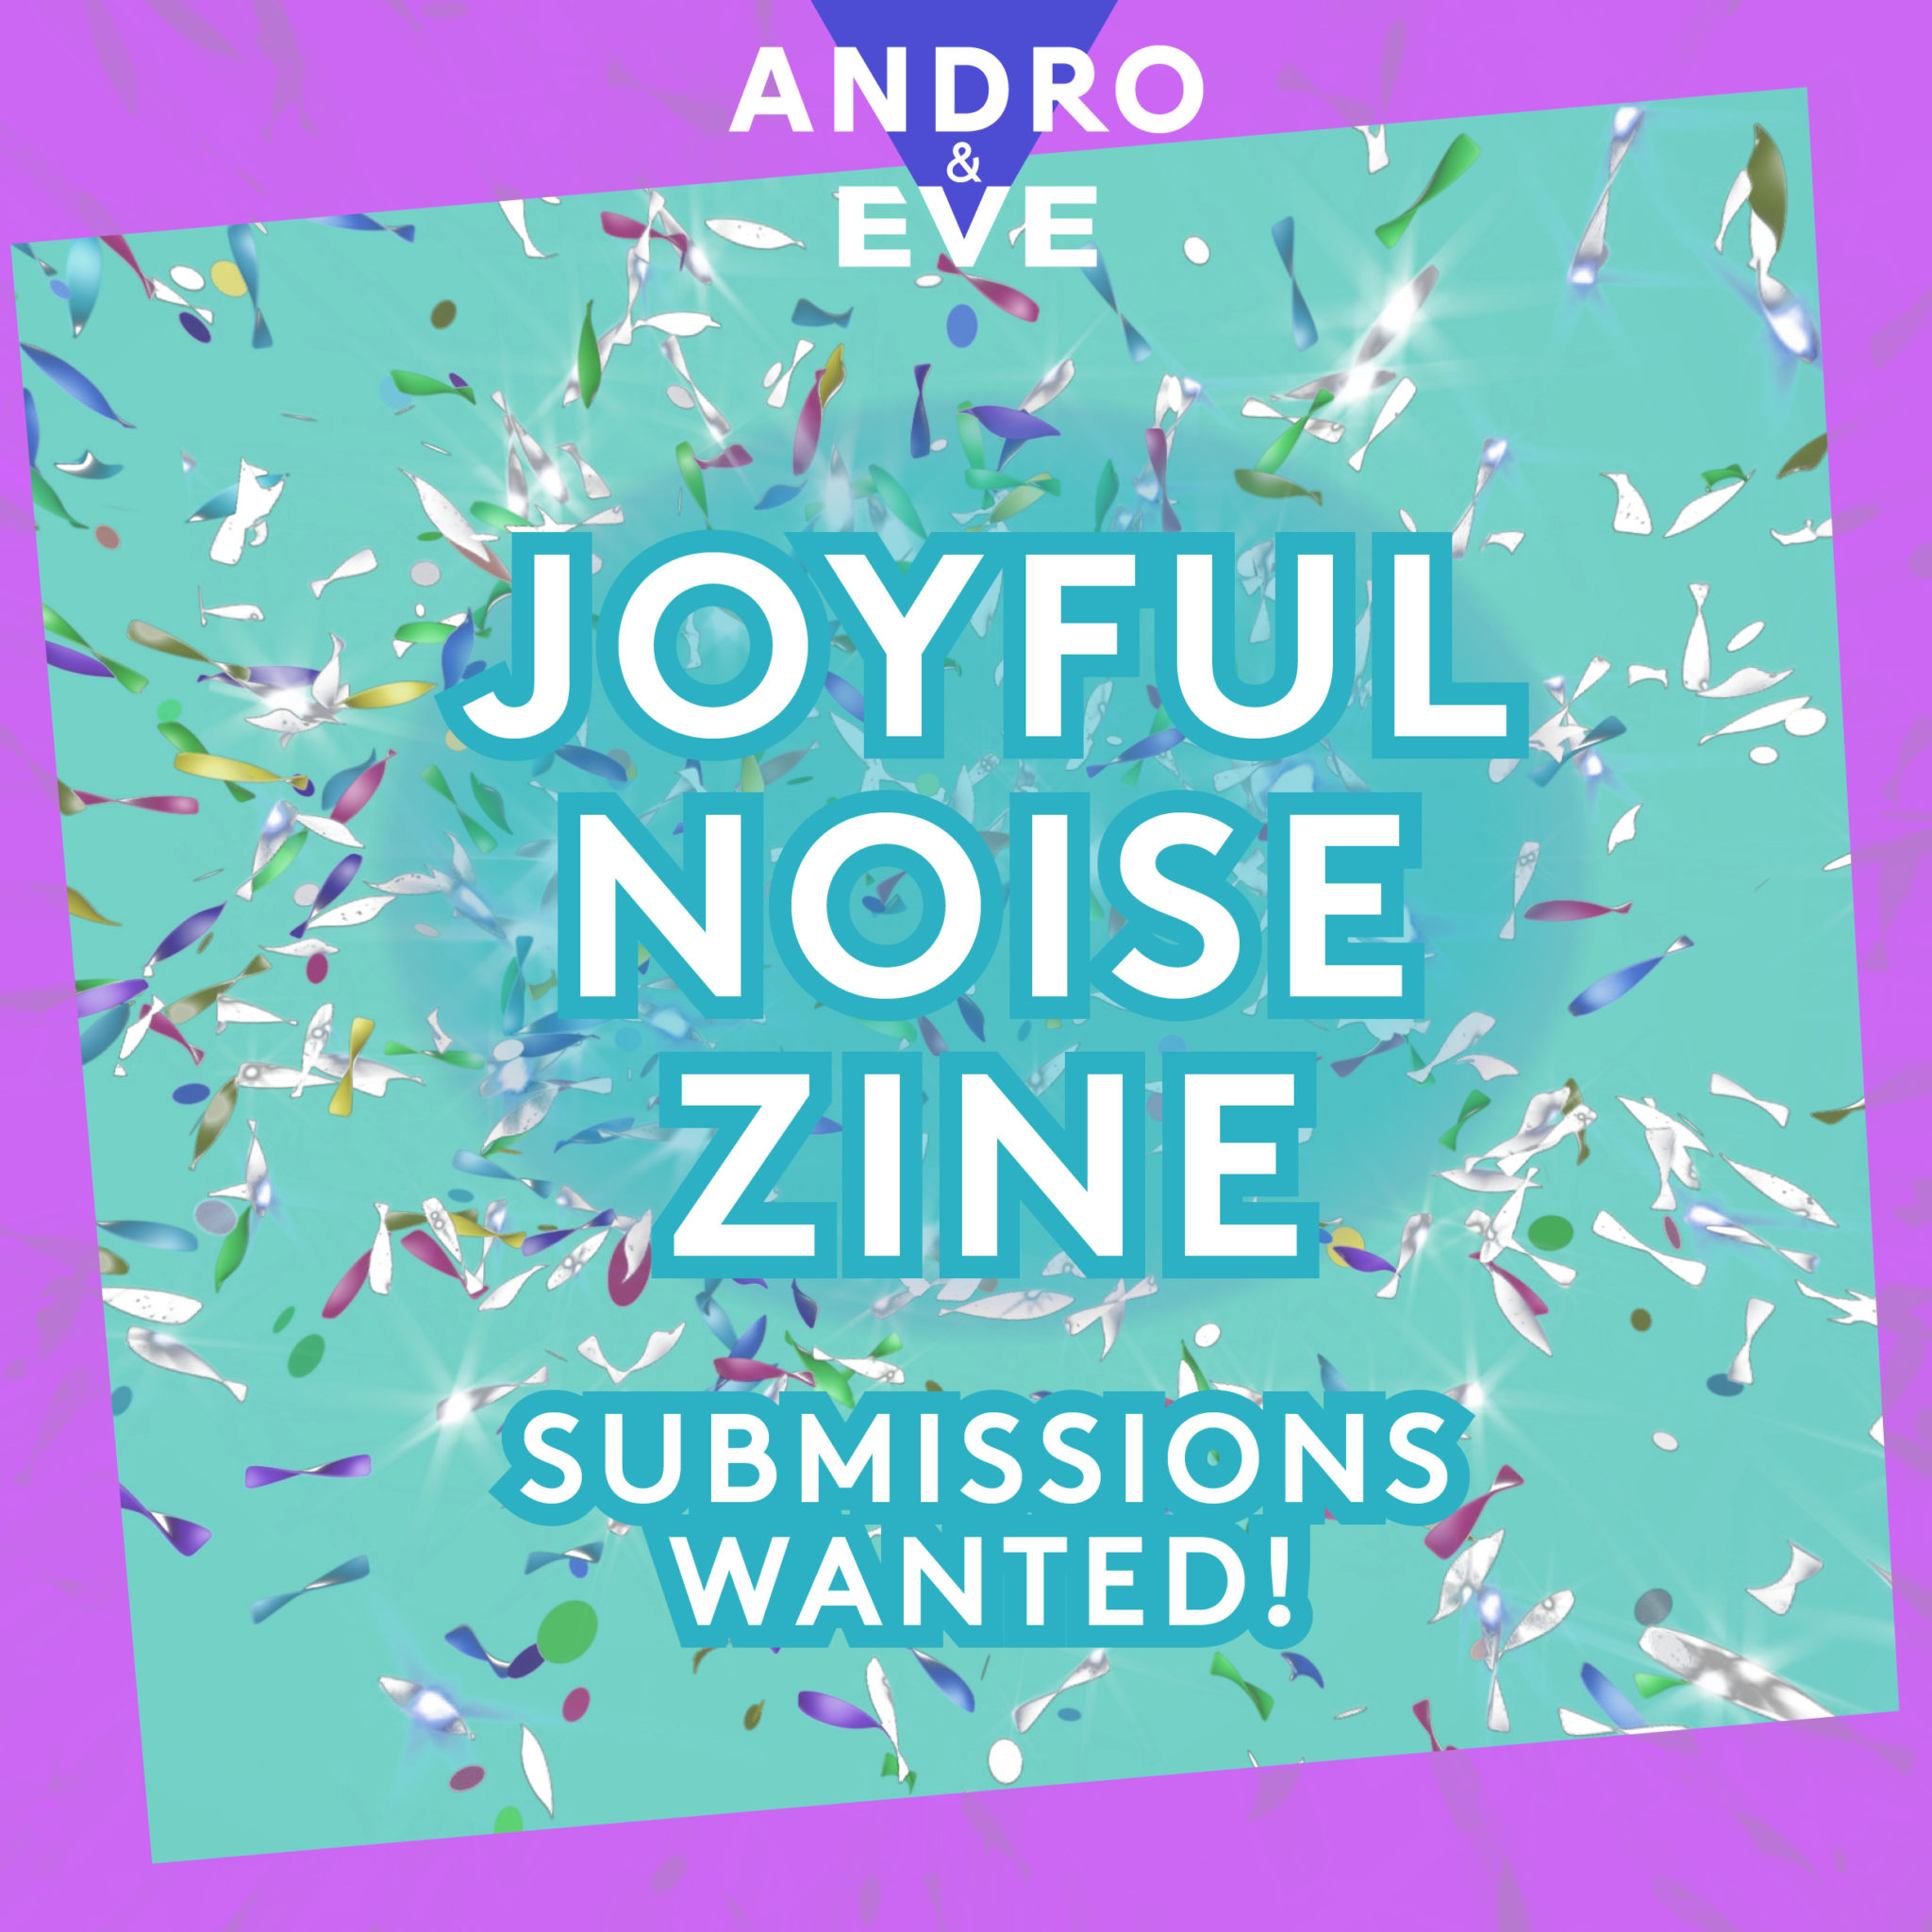 A turquoise square is covered in glitter that looks like it came from a canon. The words Joyful Noise Zine are in the centre of the image with the words, Submissions wanted below. The image is framed by a wonky pink border with the Andro and Eve logo at the top in purple and white.